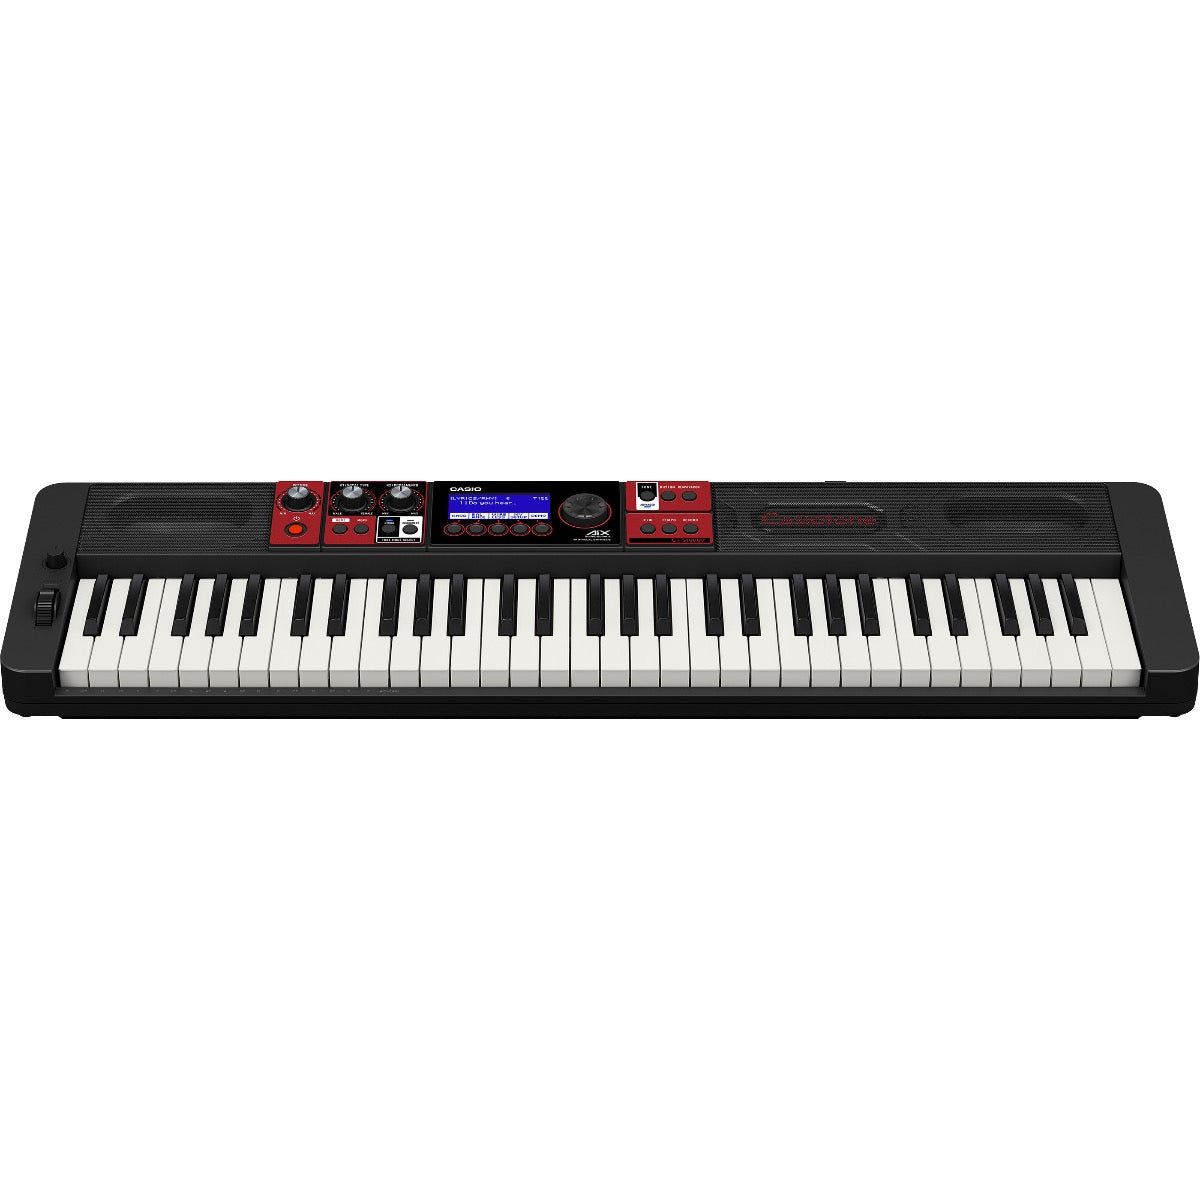 Casio Casiotone CT-S1000V Portable Keyboard View 4